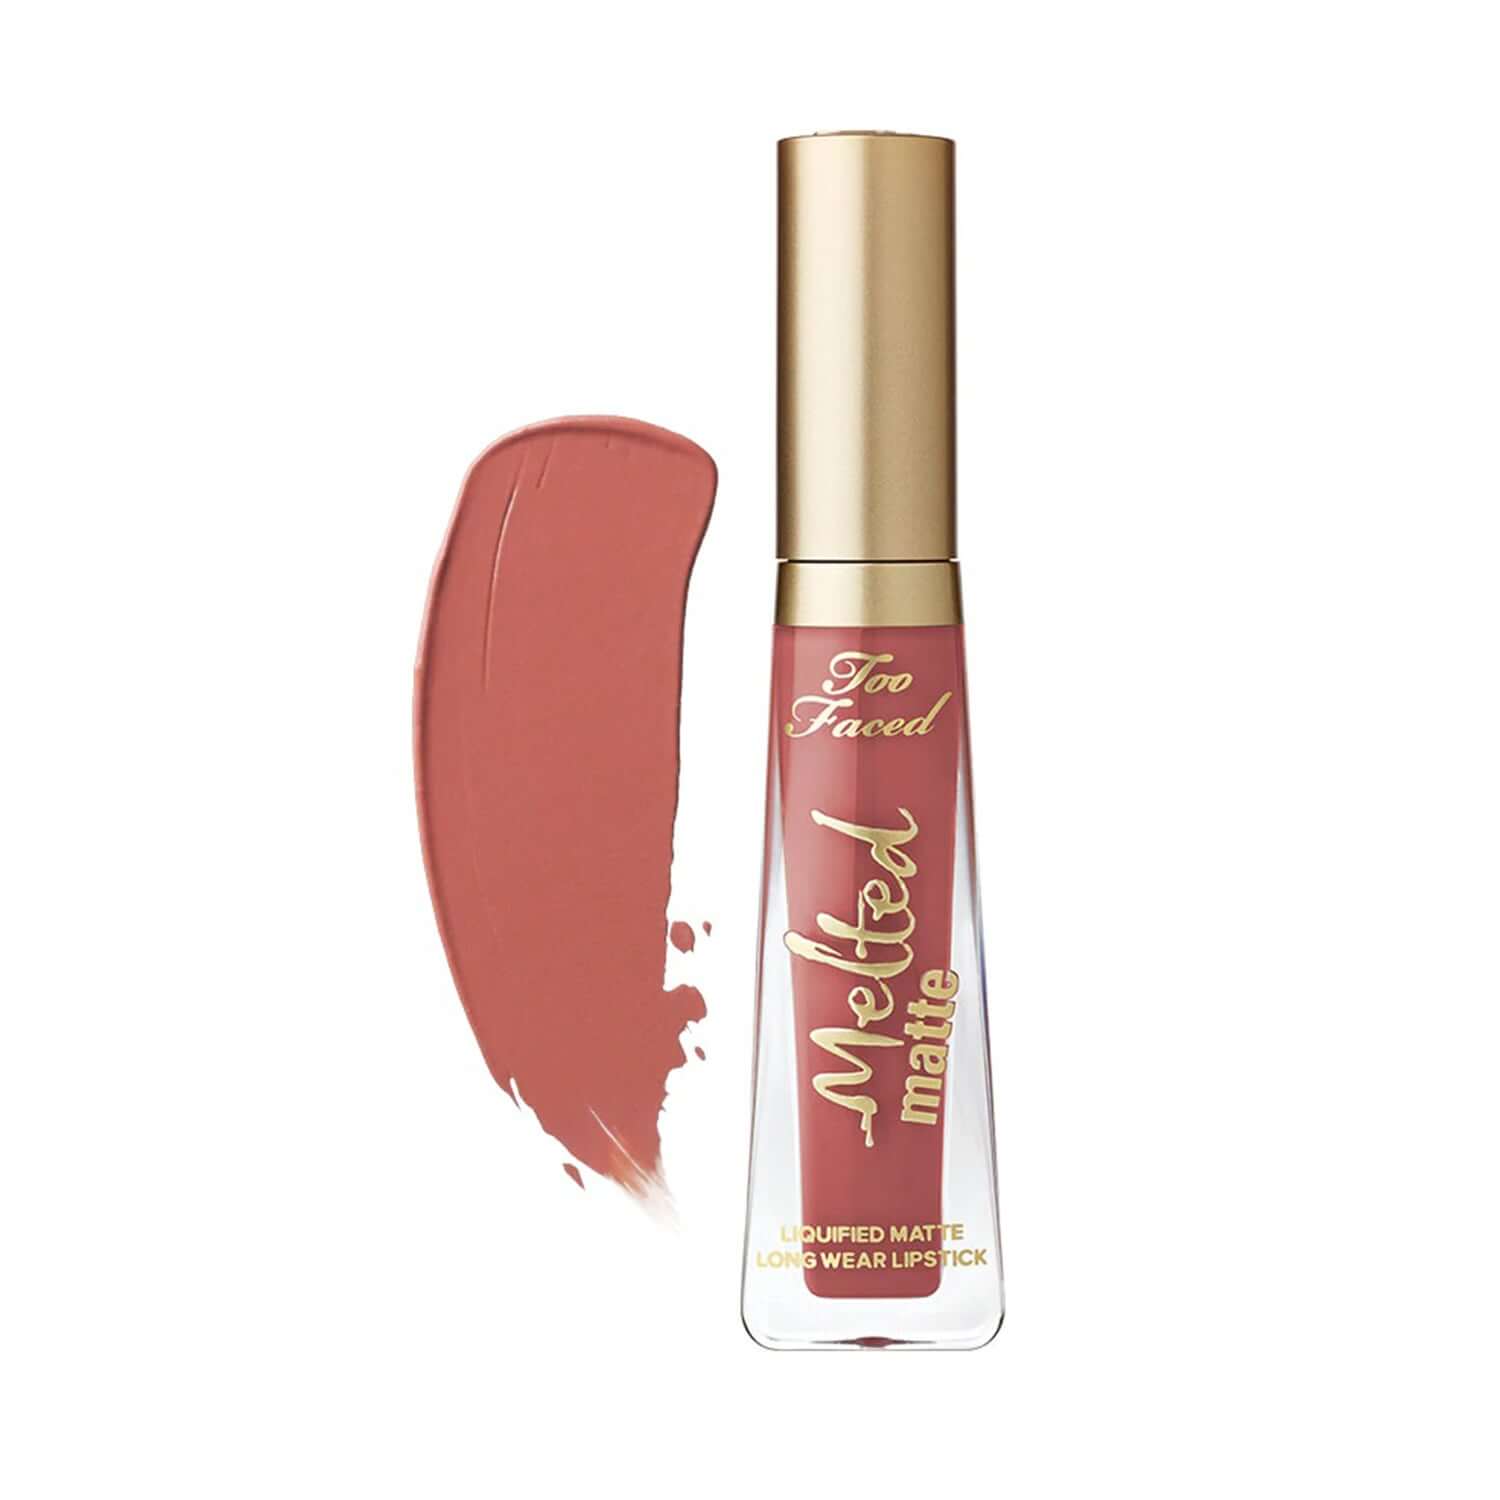 Too Faced Melted Matte Lipstick available at heygirl.pk for delivery in Pakistan